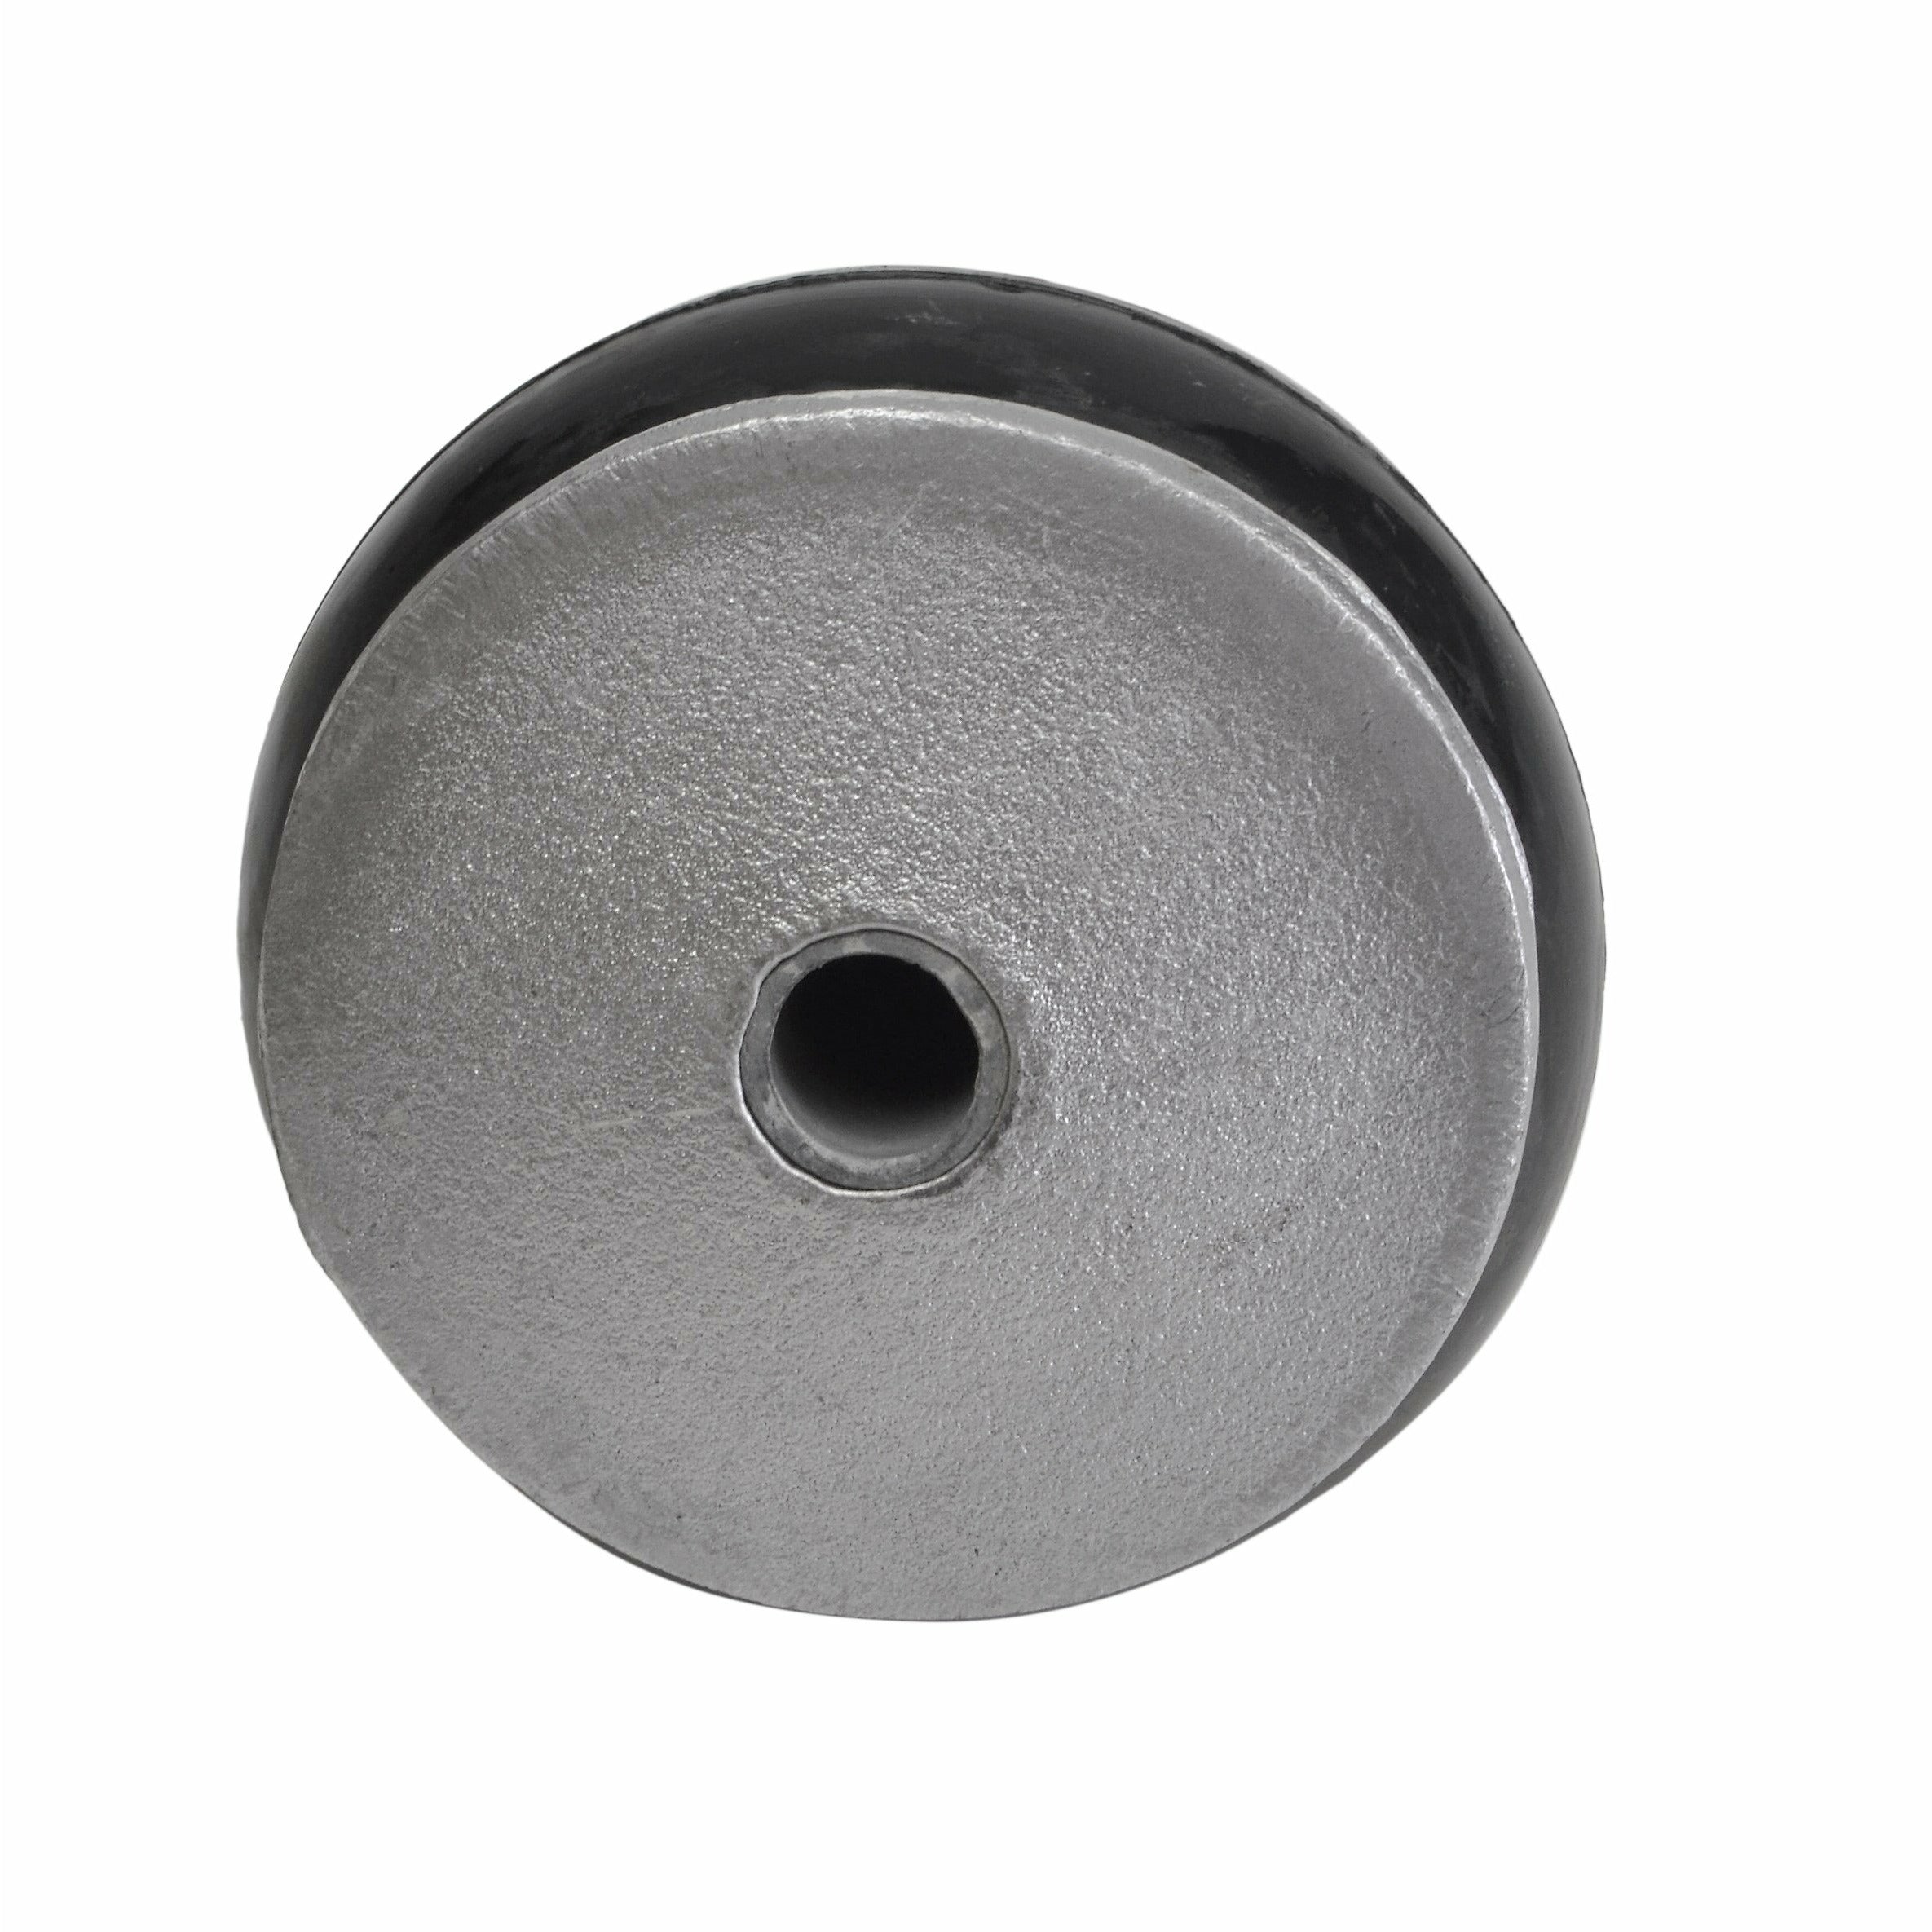 Aluminium Alloy pipe plug with 13 mm bypass 94-110mm 031/203 MPA 100-13